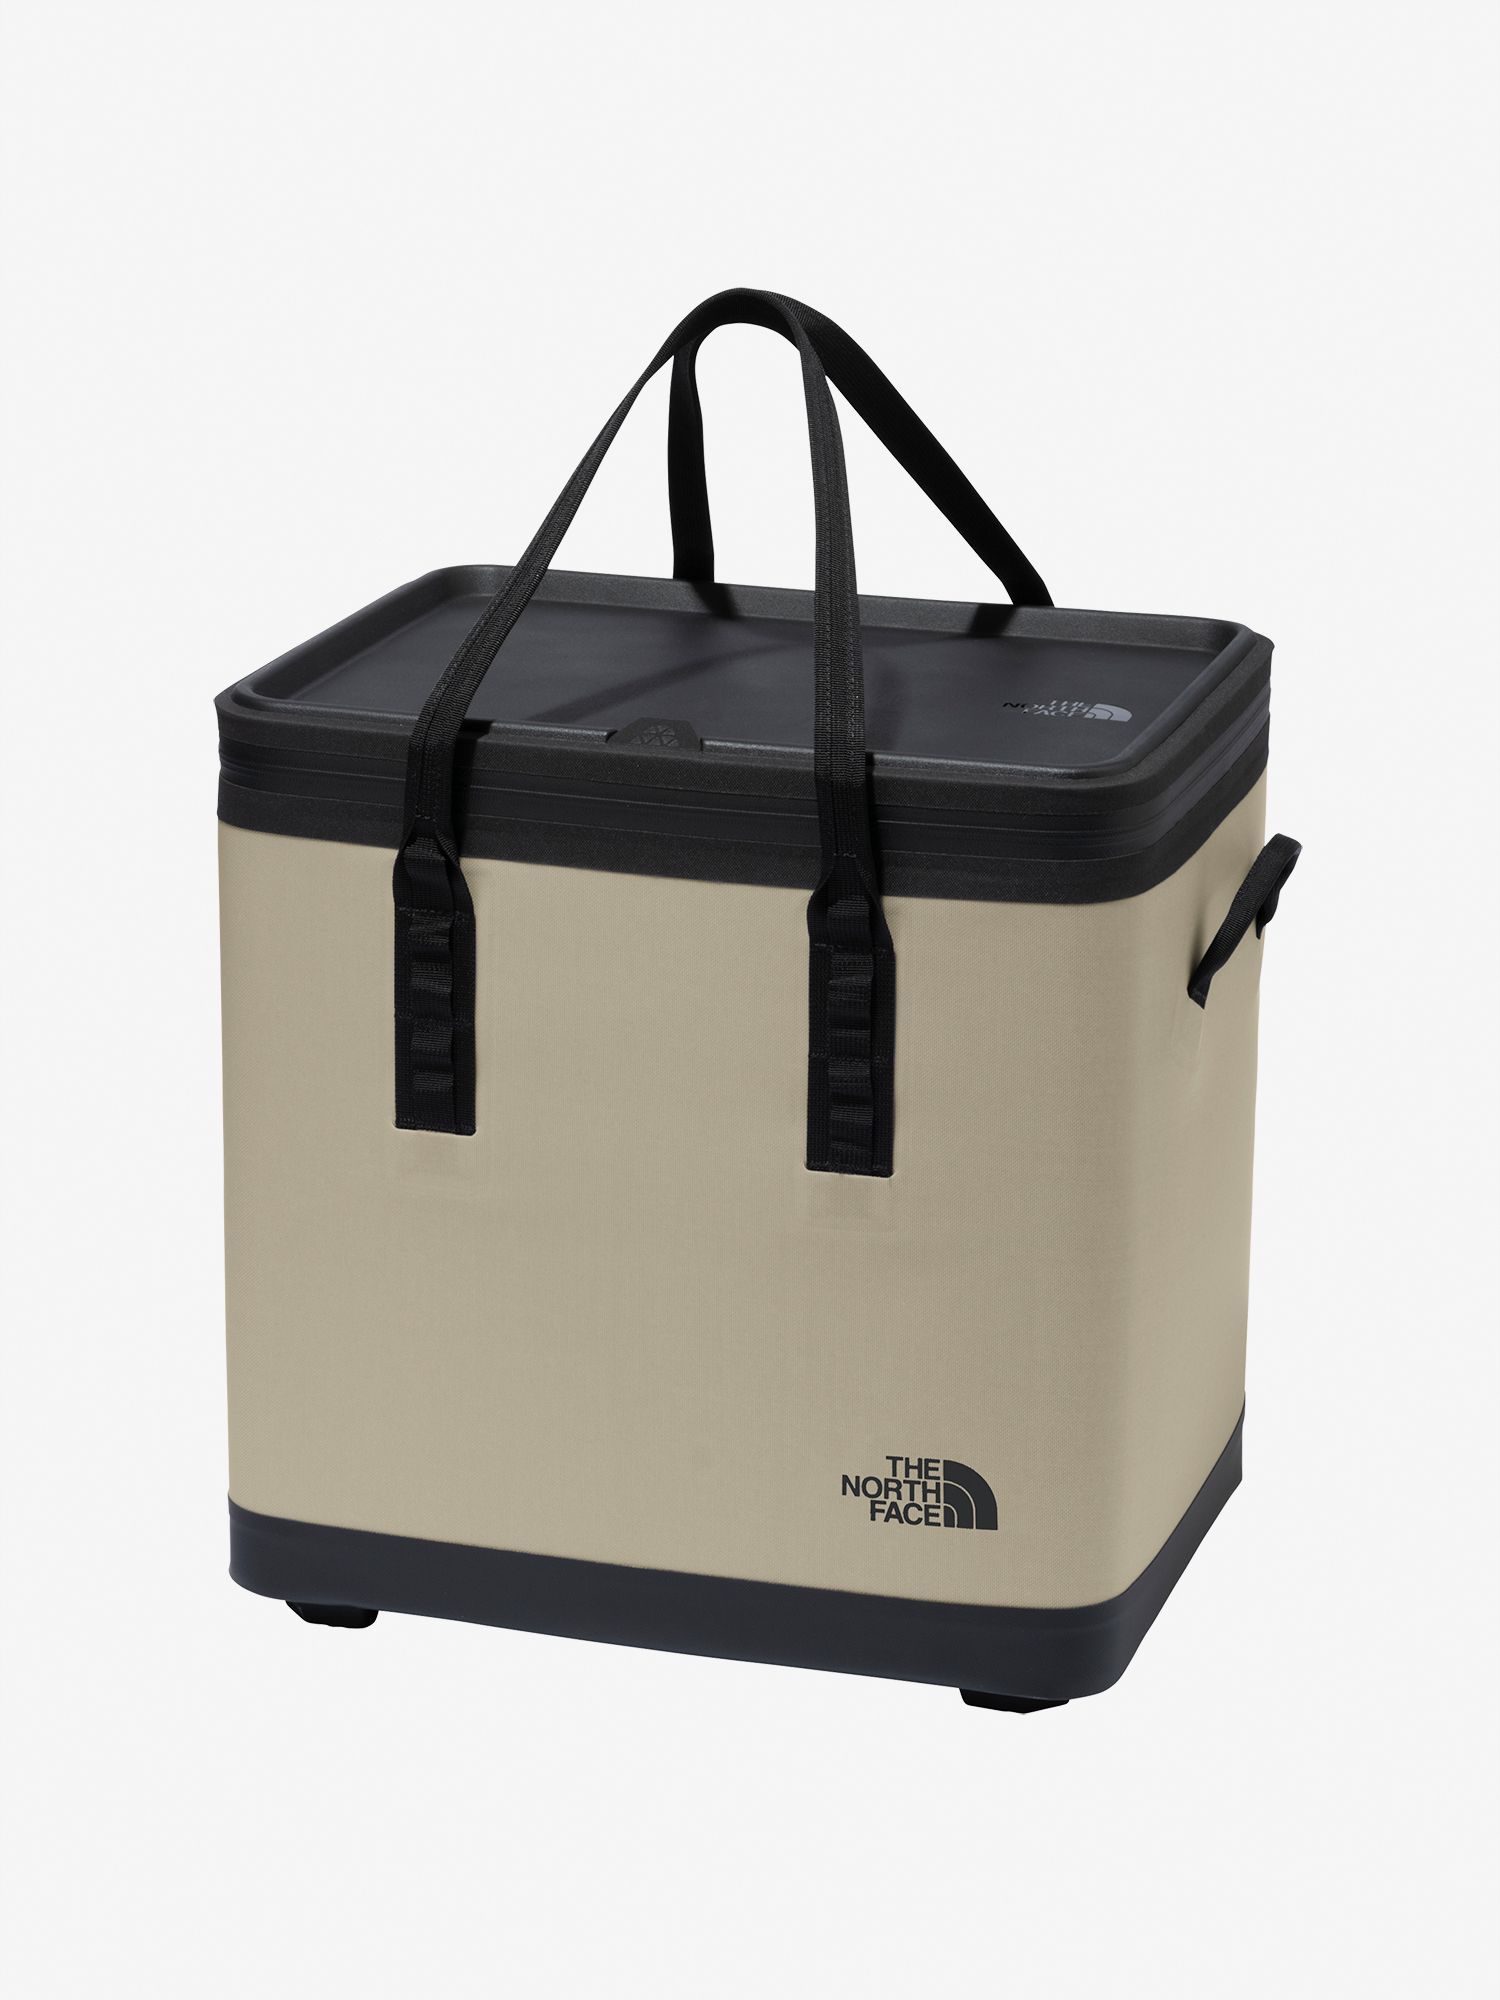 THE NORTH FACE Cooler 36 クーラーボックス